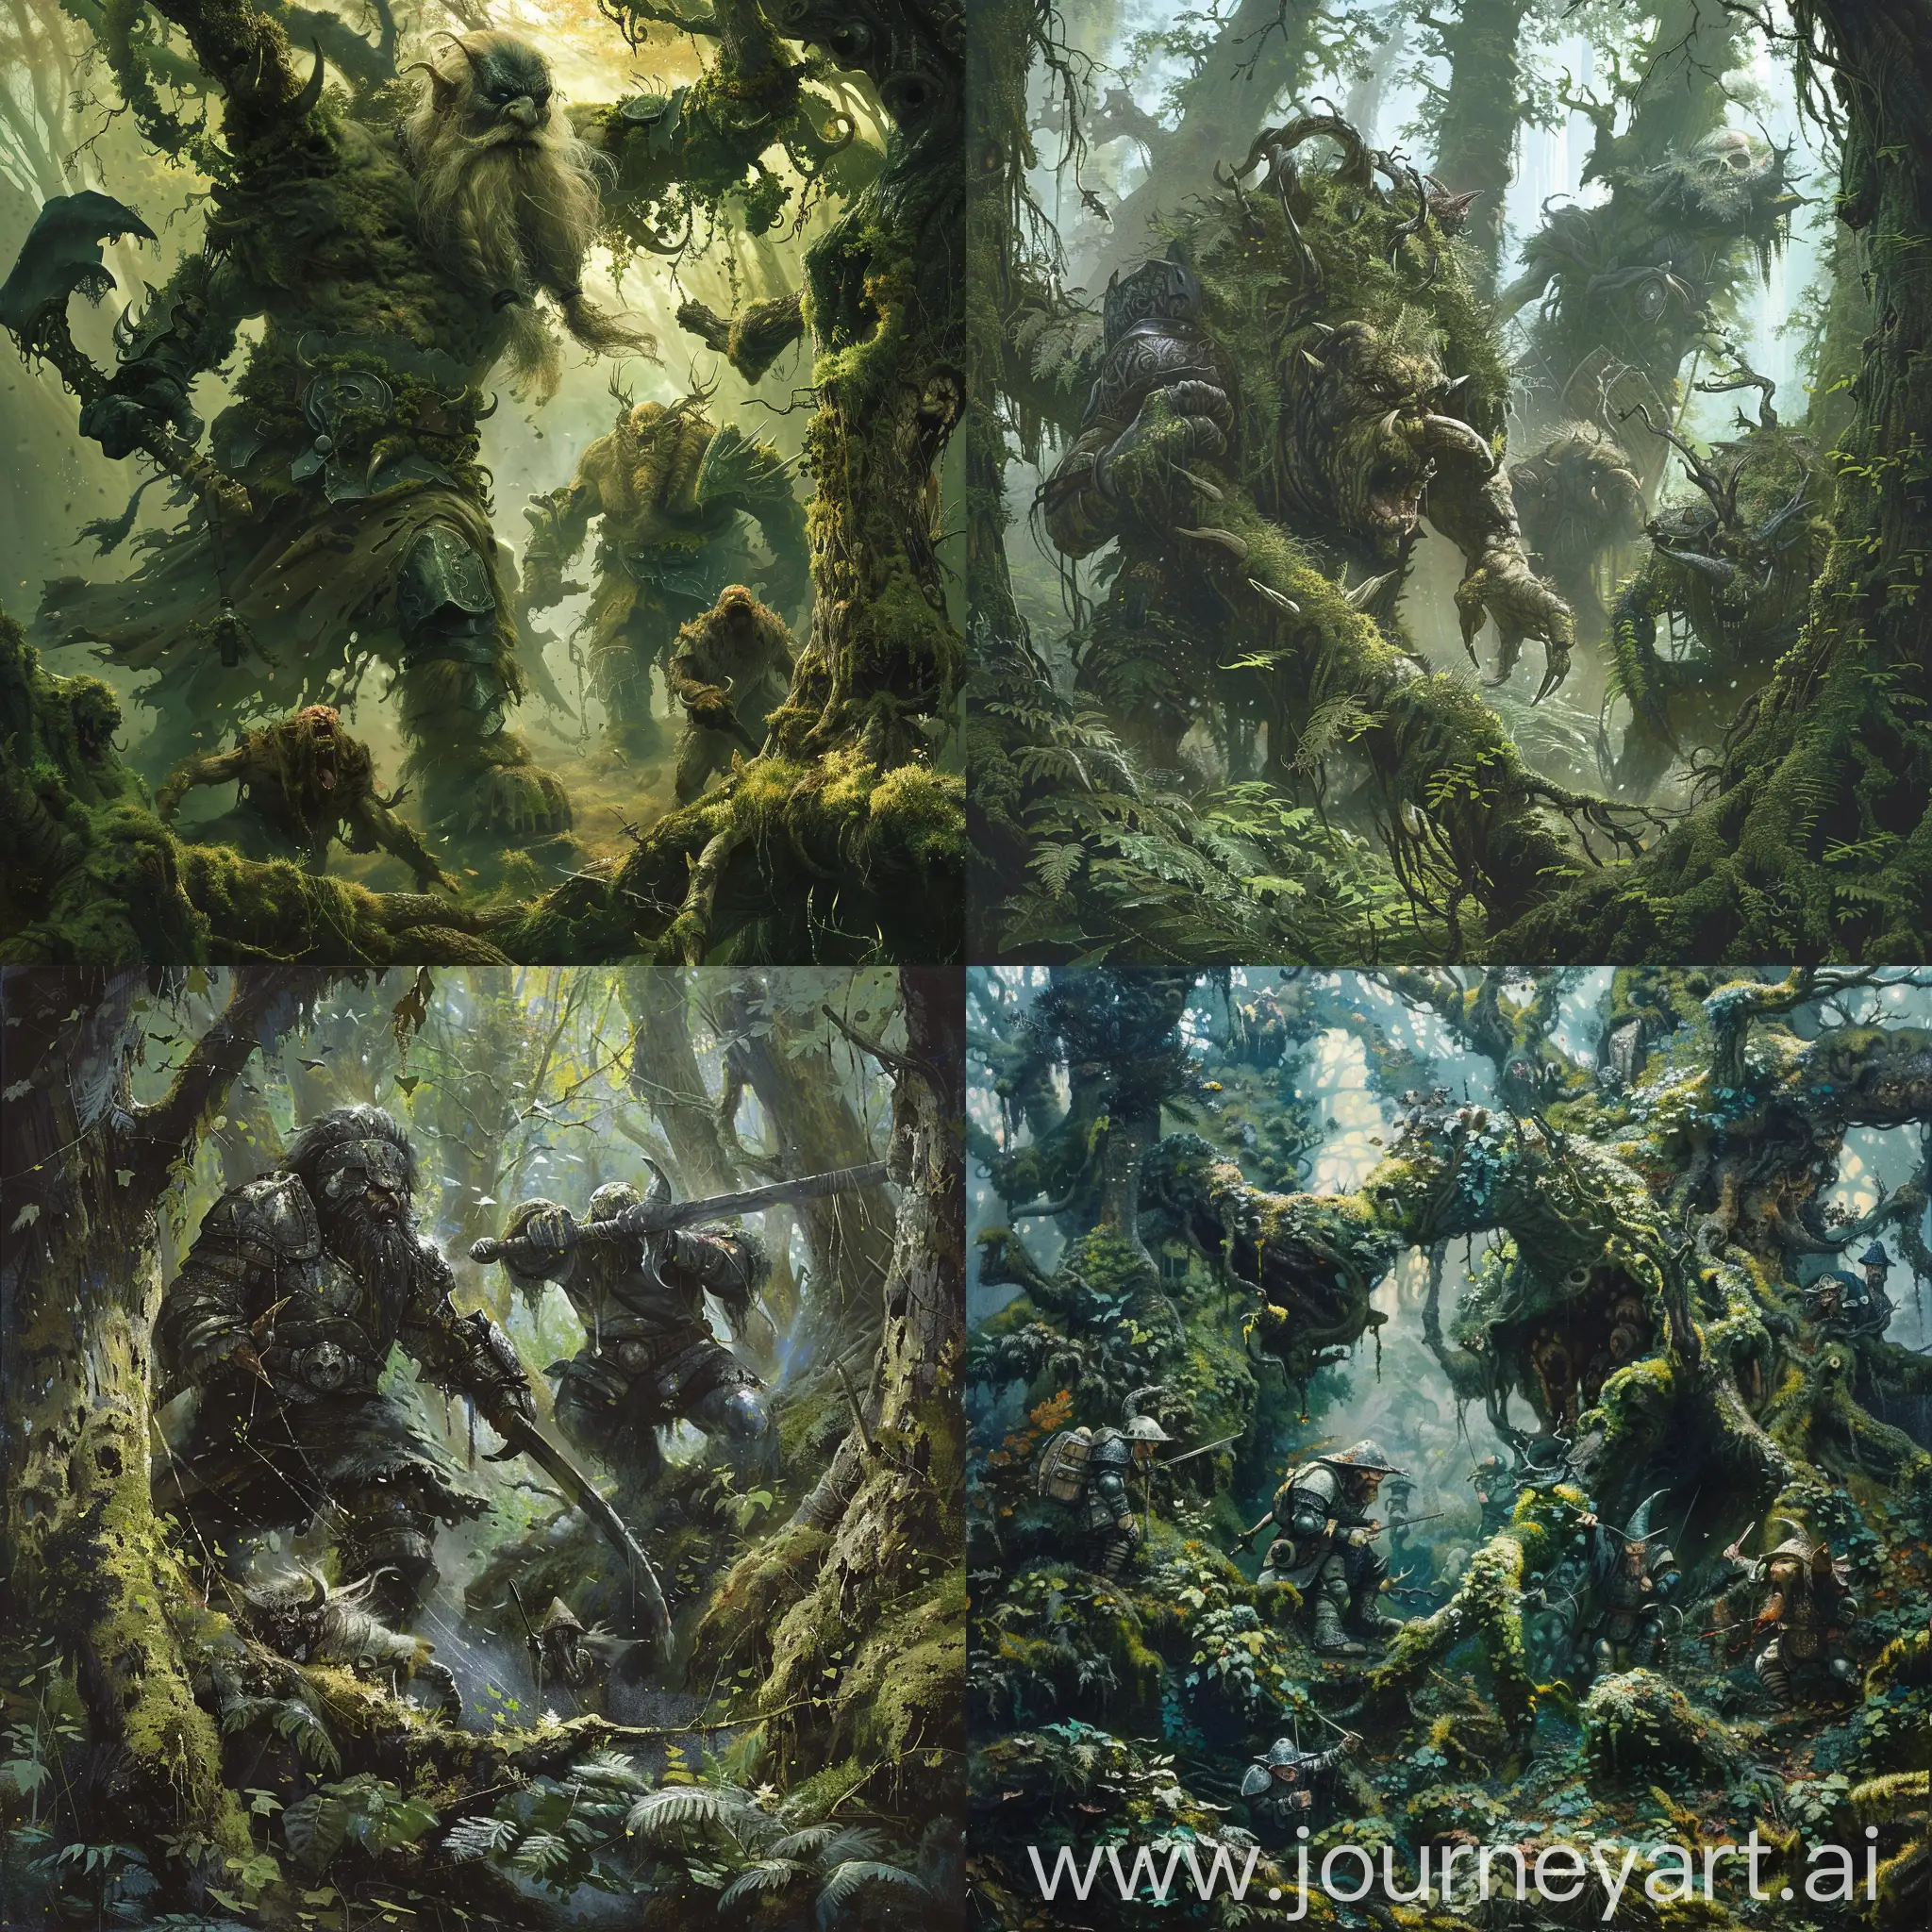 Fantasy-Battle-Trolls-in-Armor-Clash-with-Gnomes-in-a-Magical-MossCovered-Forest